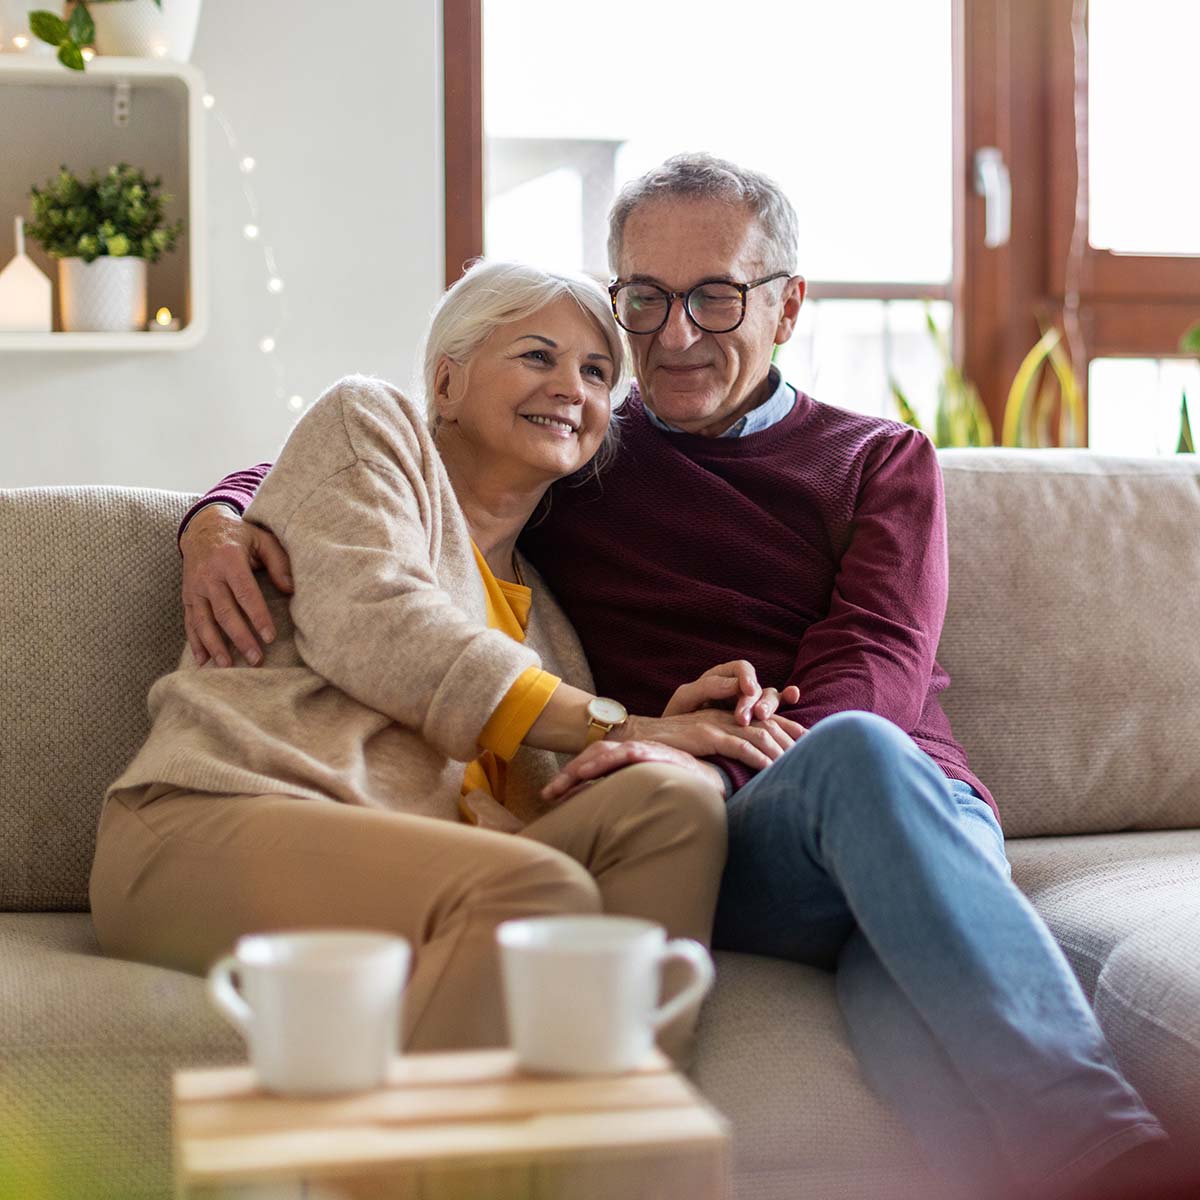 A senior couple smile together while having coffee at their couch.